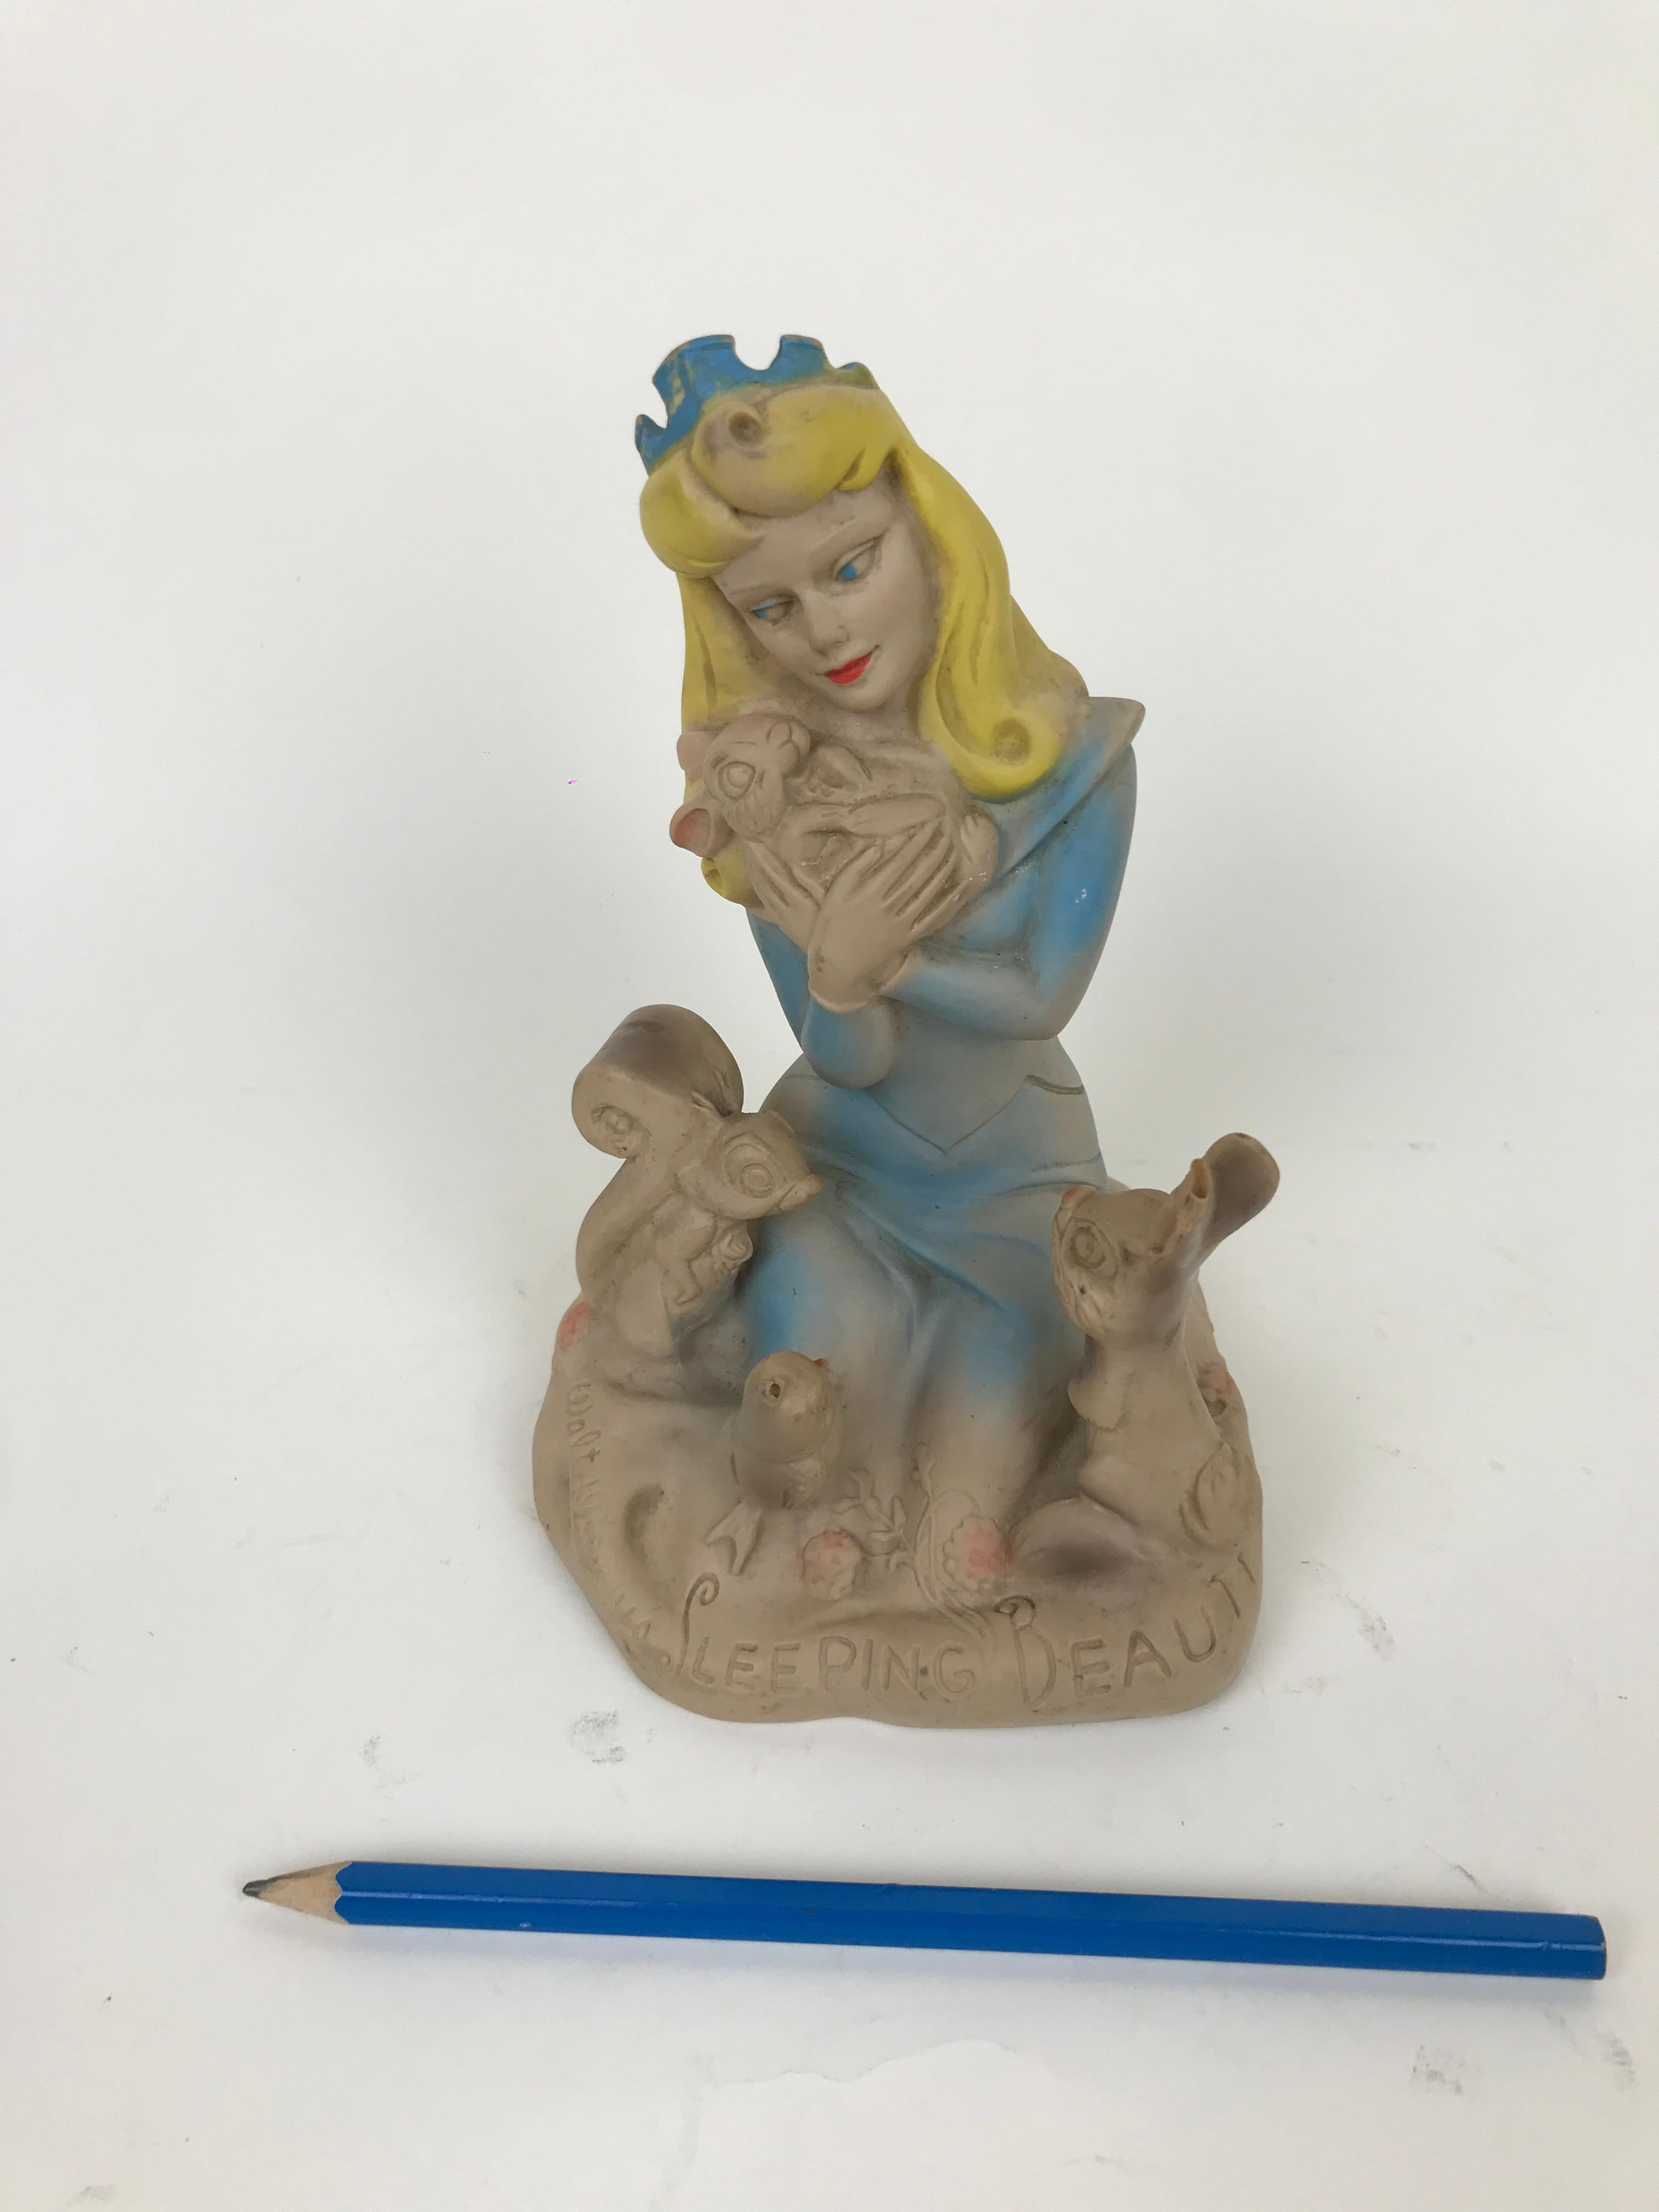 Vintage sleeping beauty squeak rubber toy made in England in the 1960s by Dell Squeak Toy.

The rubber toy represents Princess Aurora in her blue gawn sitting on a rock surrounded by a squirrel, a owl and a rabbit, while she is holding a small